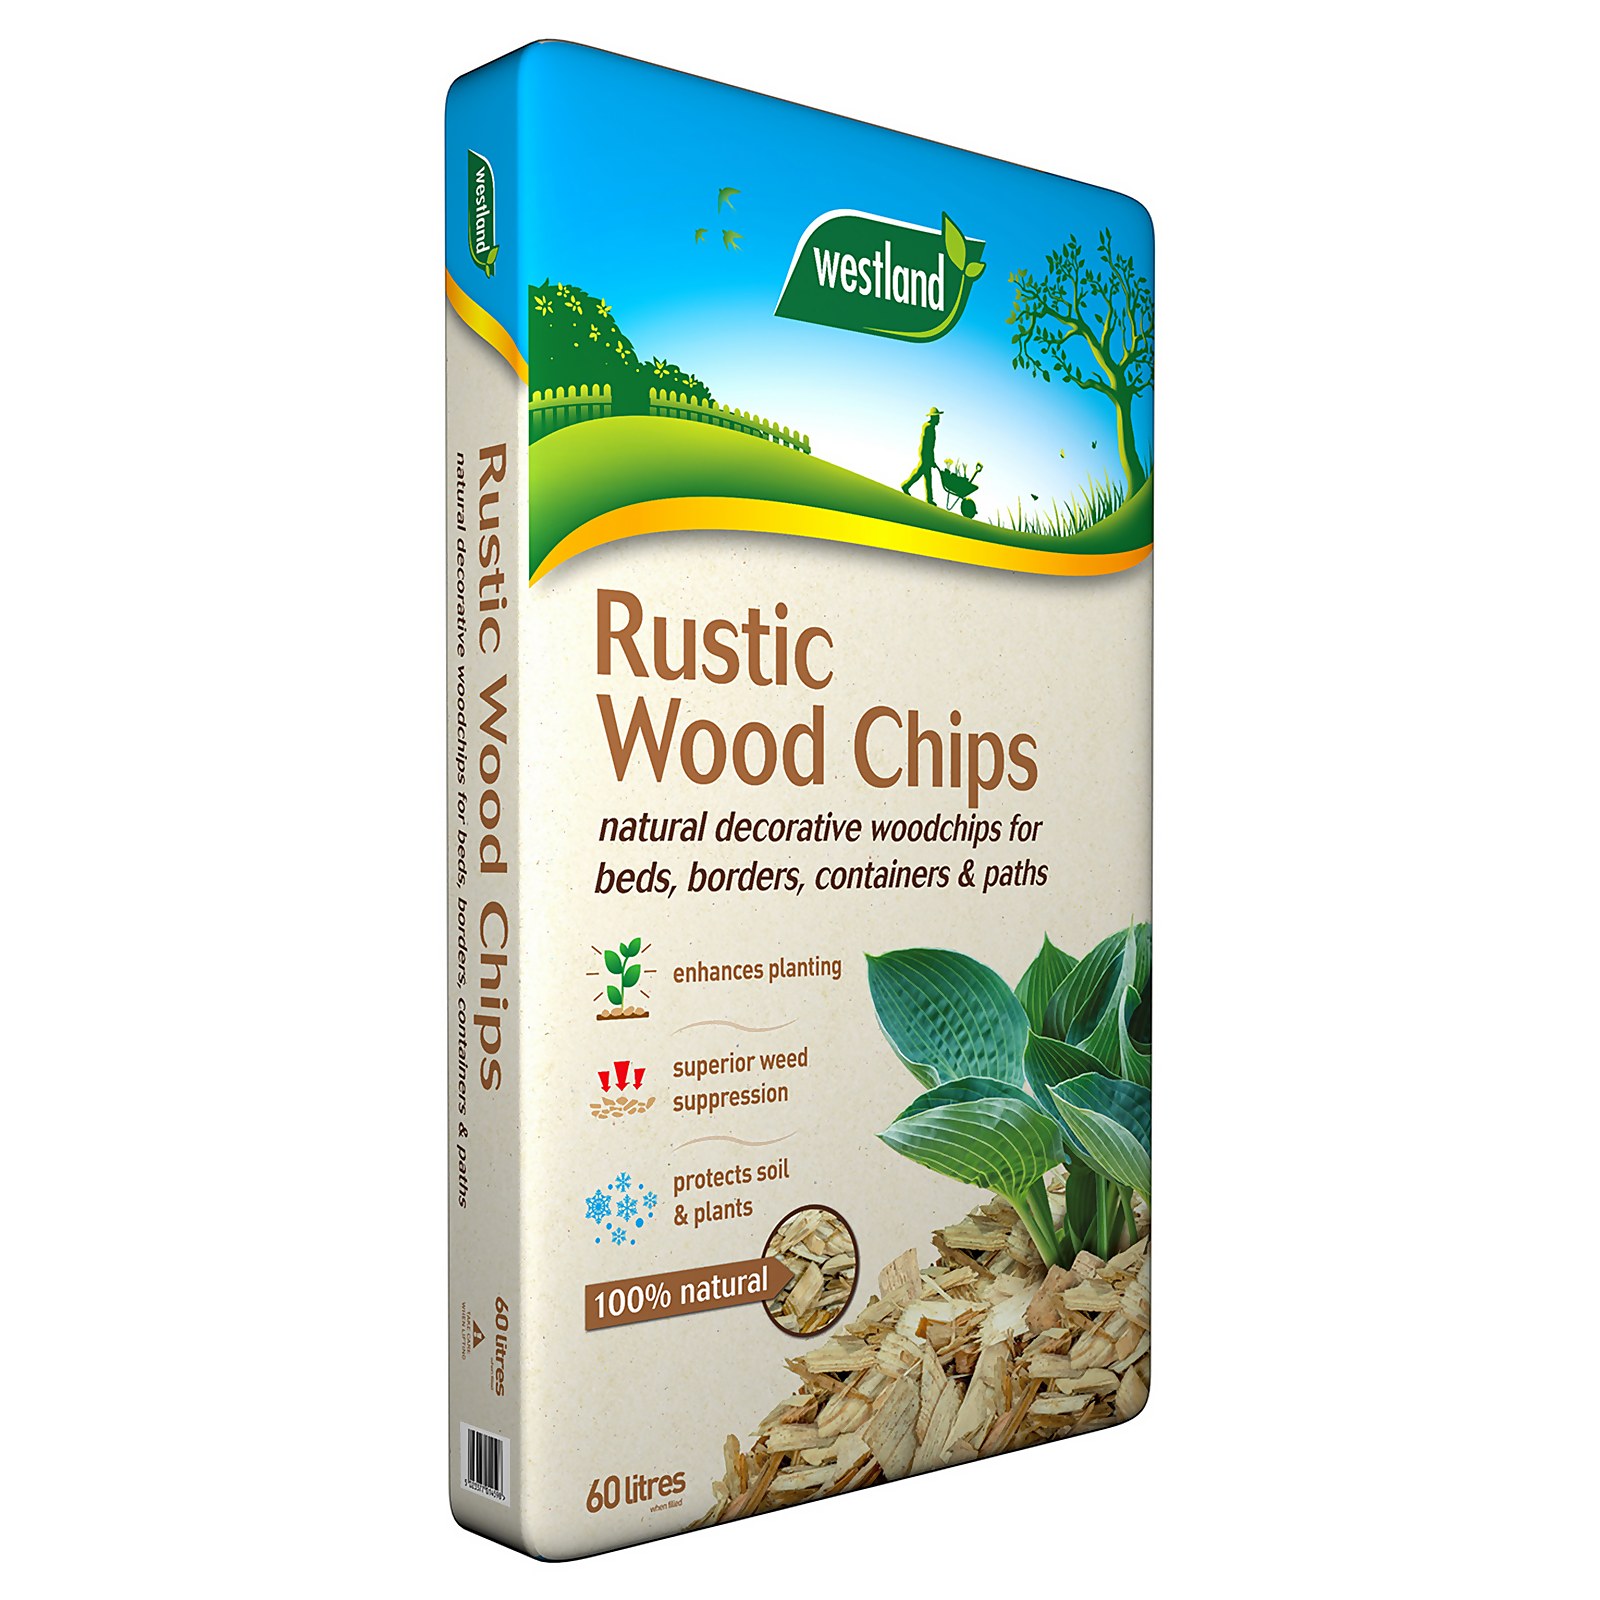 Photo of Westland Rustic Wood Chips - 60l